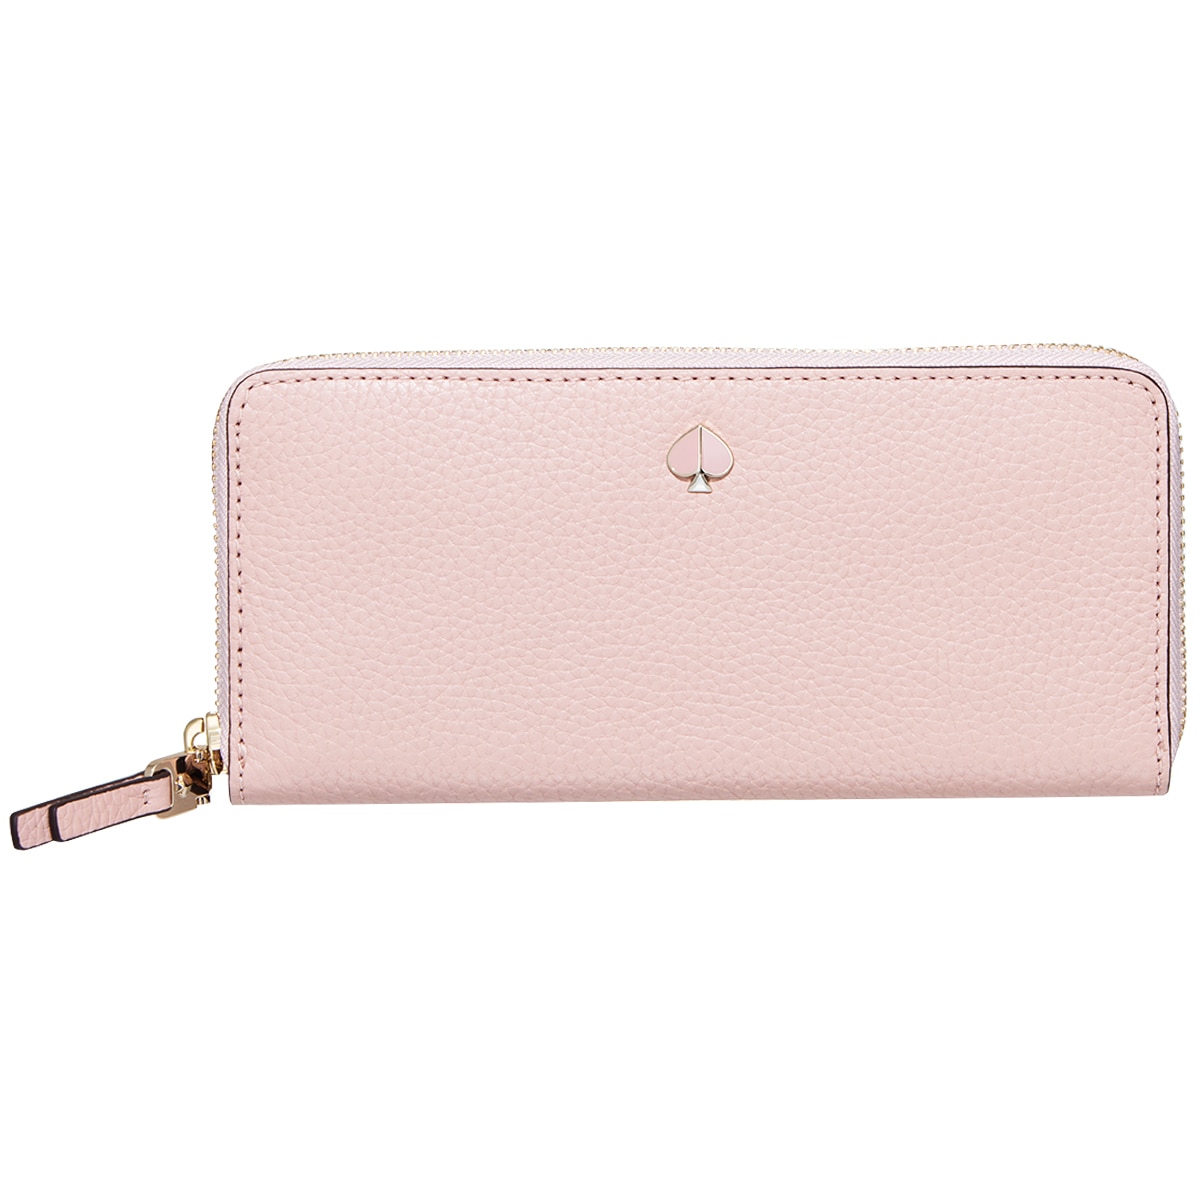 Kate Spade Polly Slim Continental Wallet - Flapper Pink